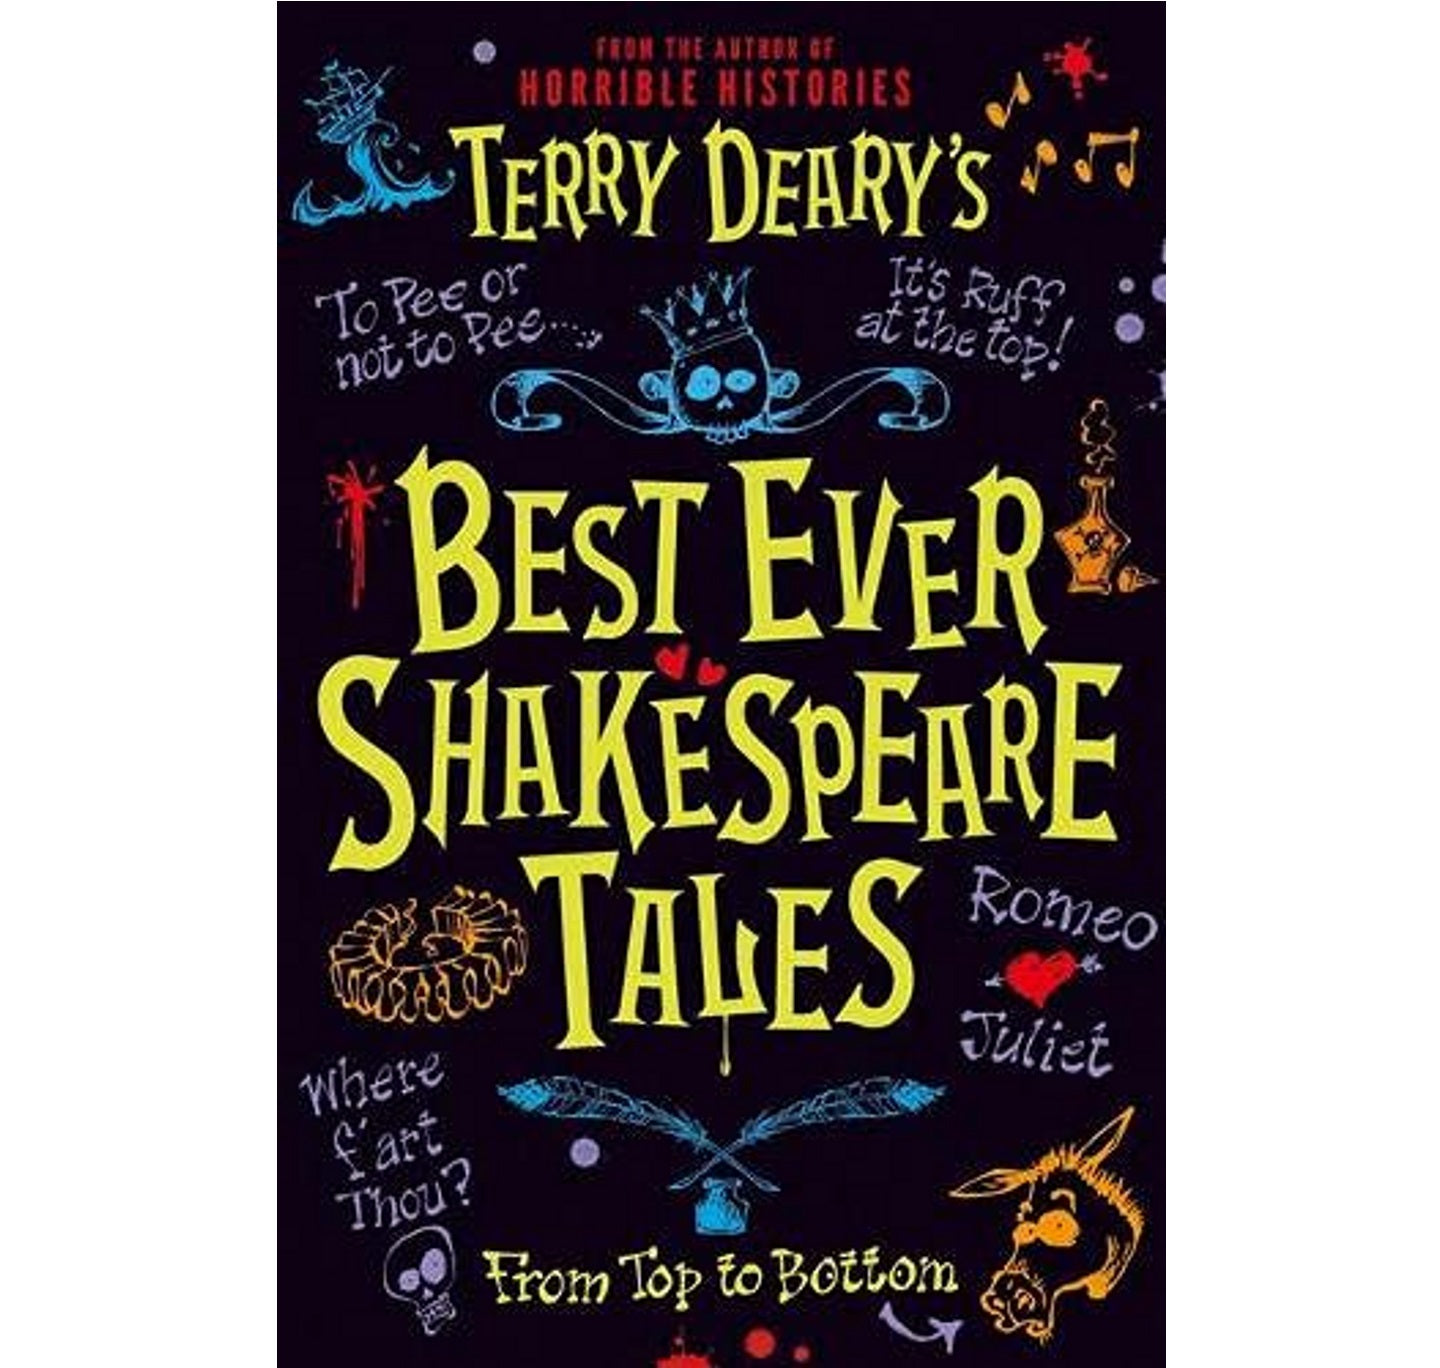 Terry Deary's Best Ever Shakespeare Tales PB